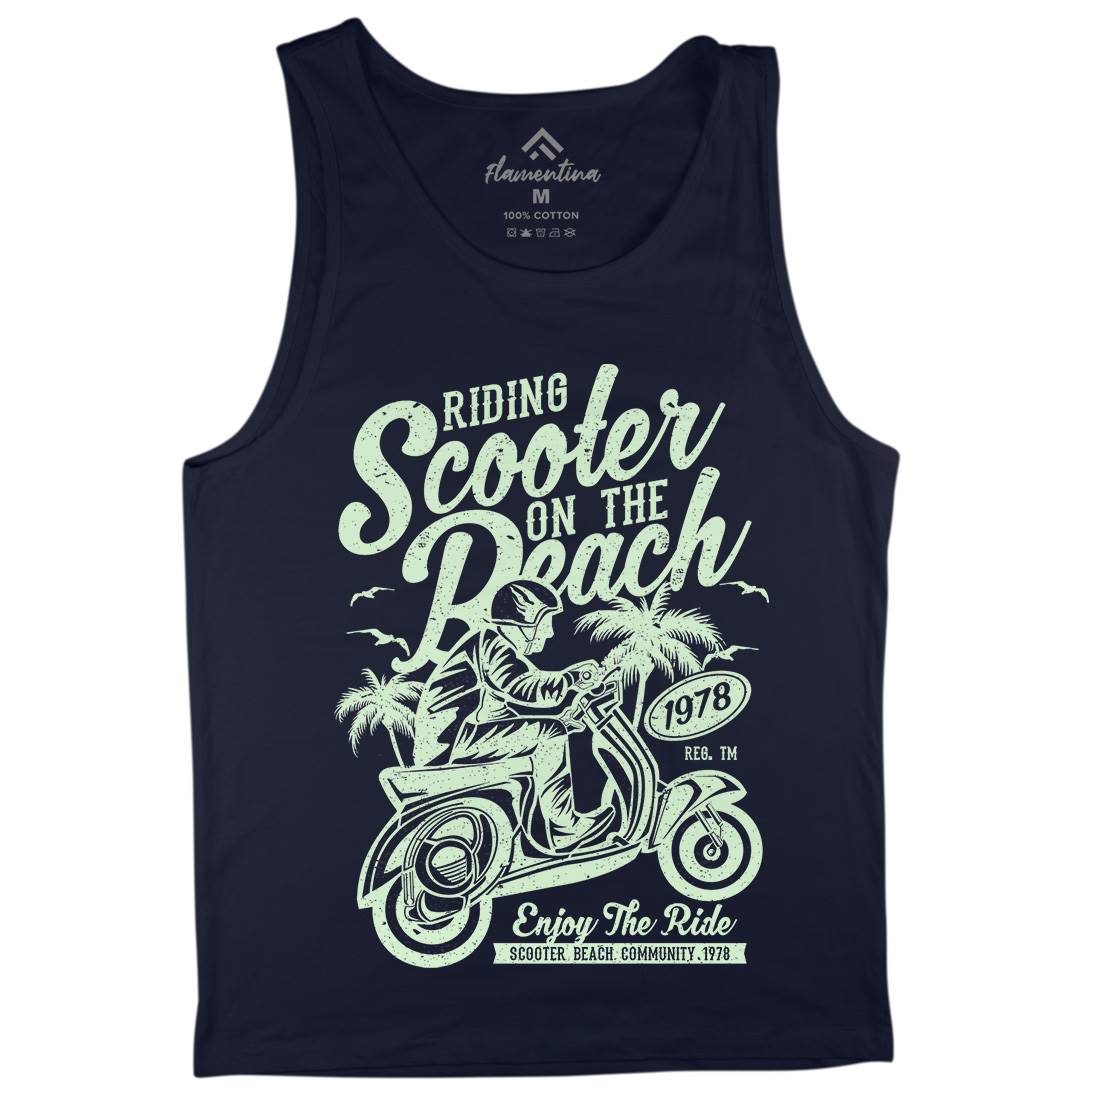 Scooter Beach Mens Tank Top Vest Motorcycles A134